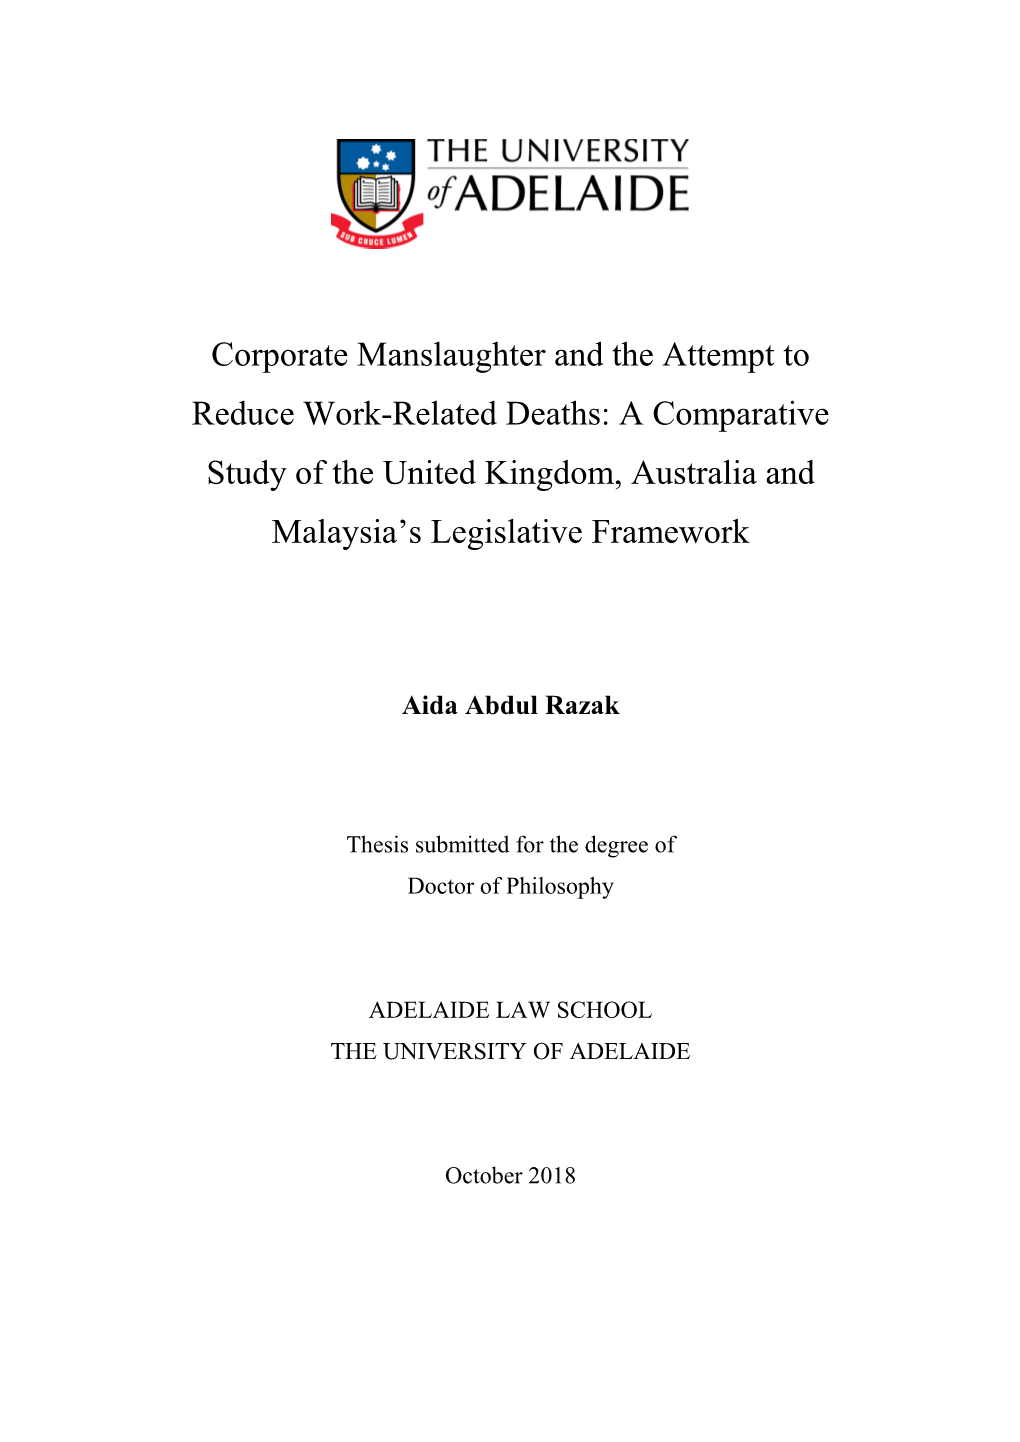 Corporate Manslaughter and the Attempt to Reduce Work-Related Deaths: a Comparative Study of the United Kingdom, Australia and Malaysia‘S Legislative Framework